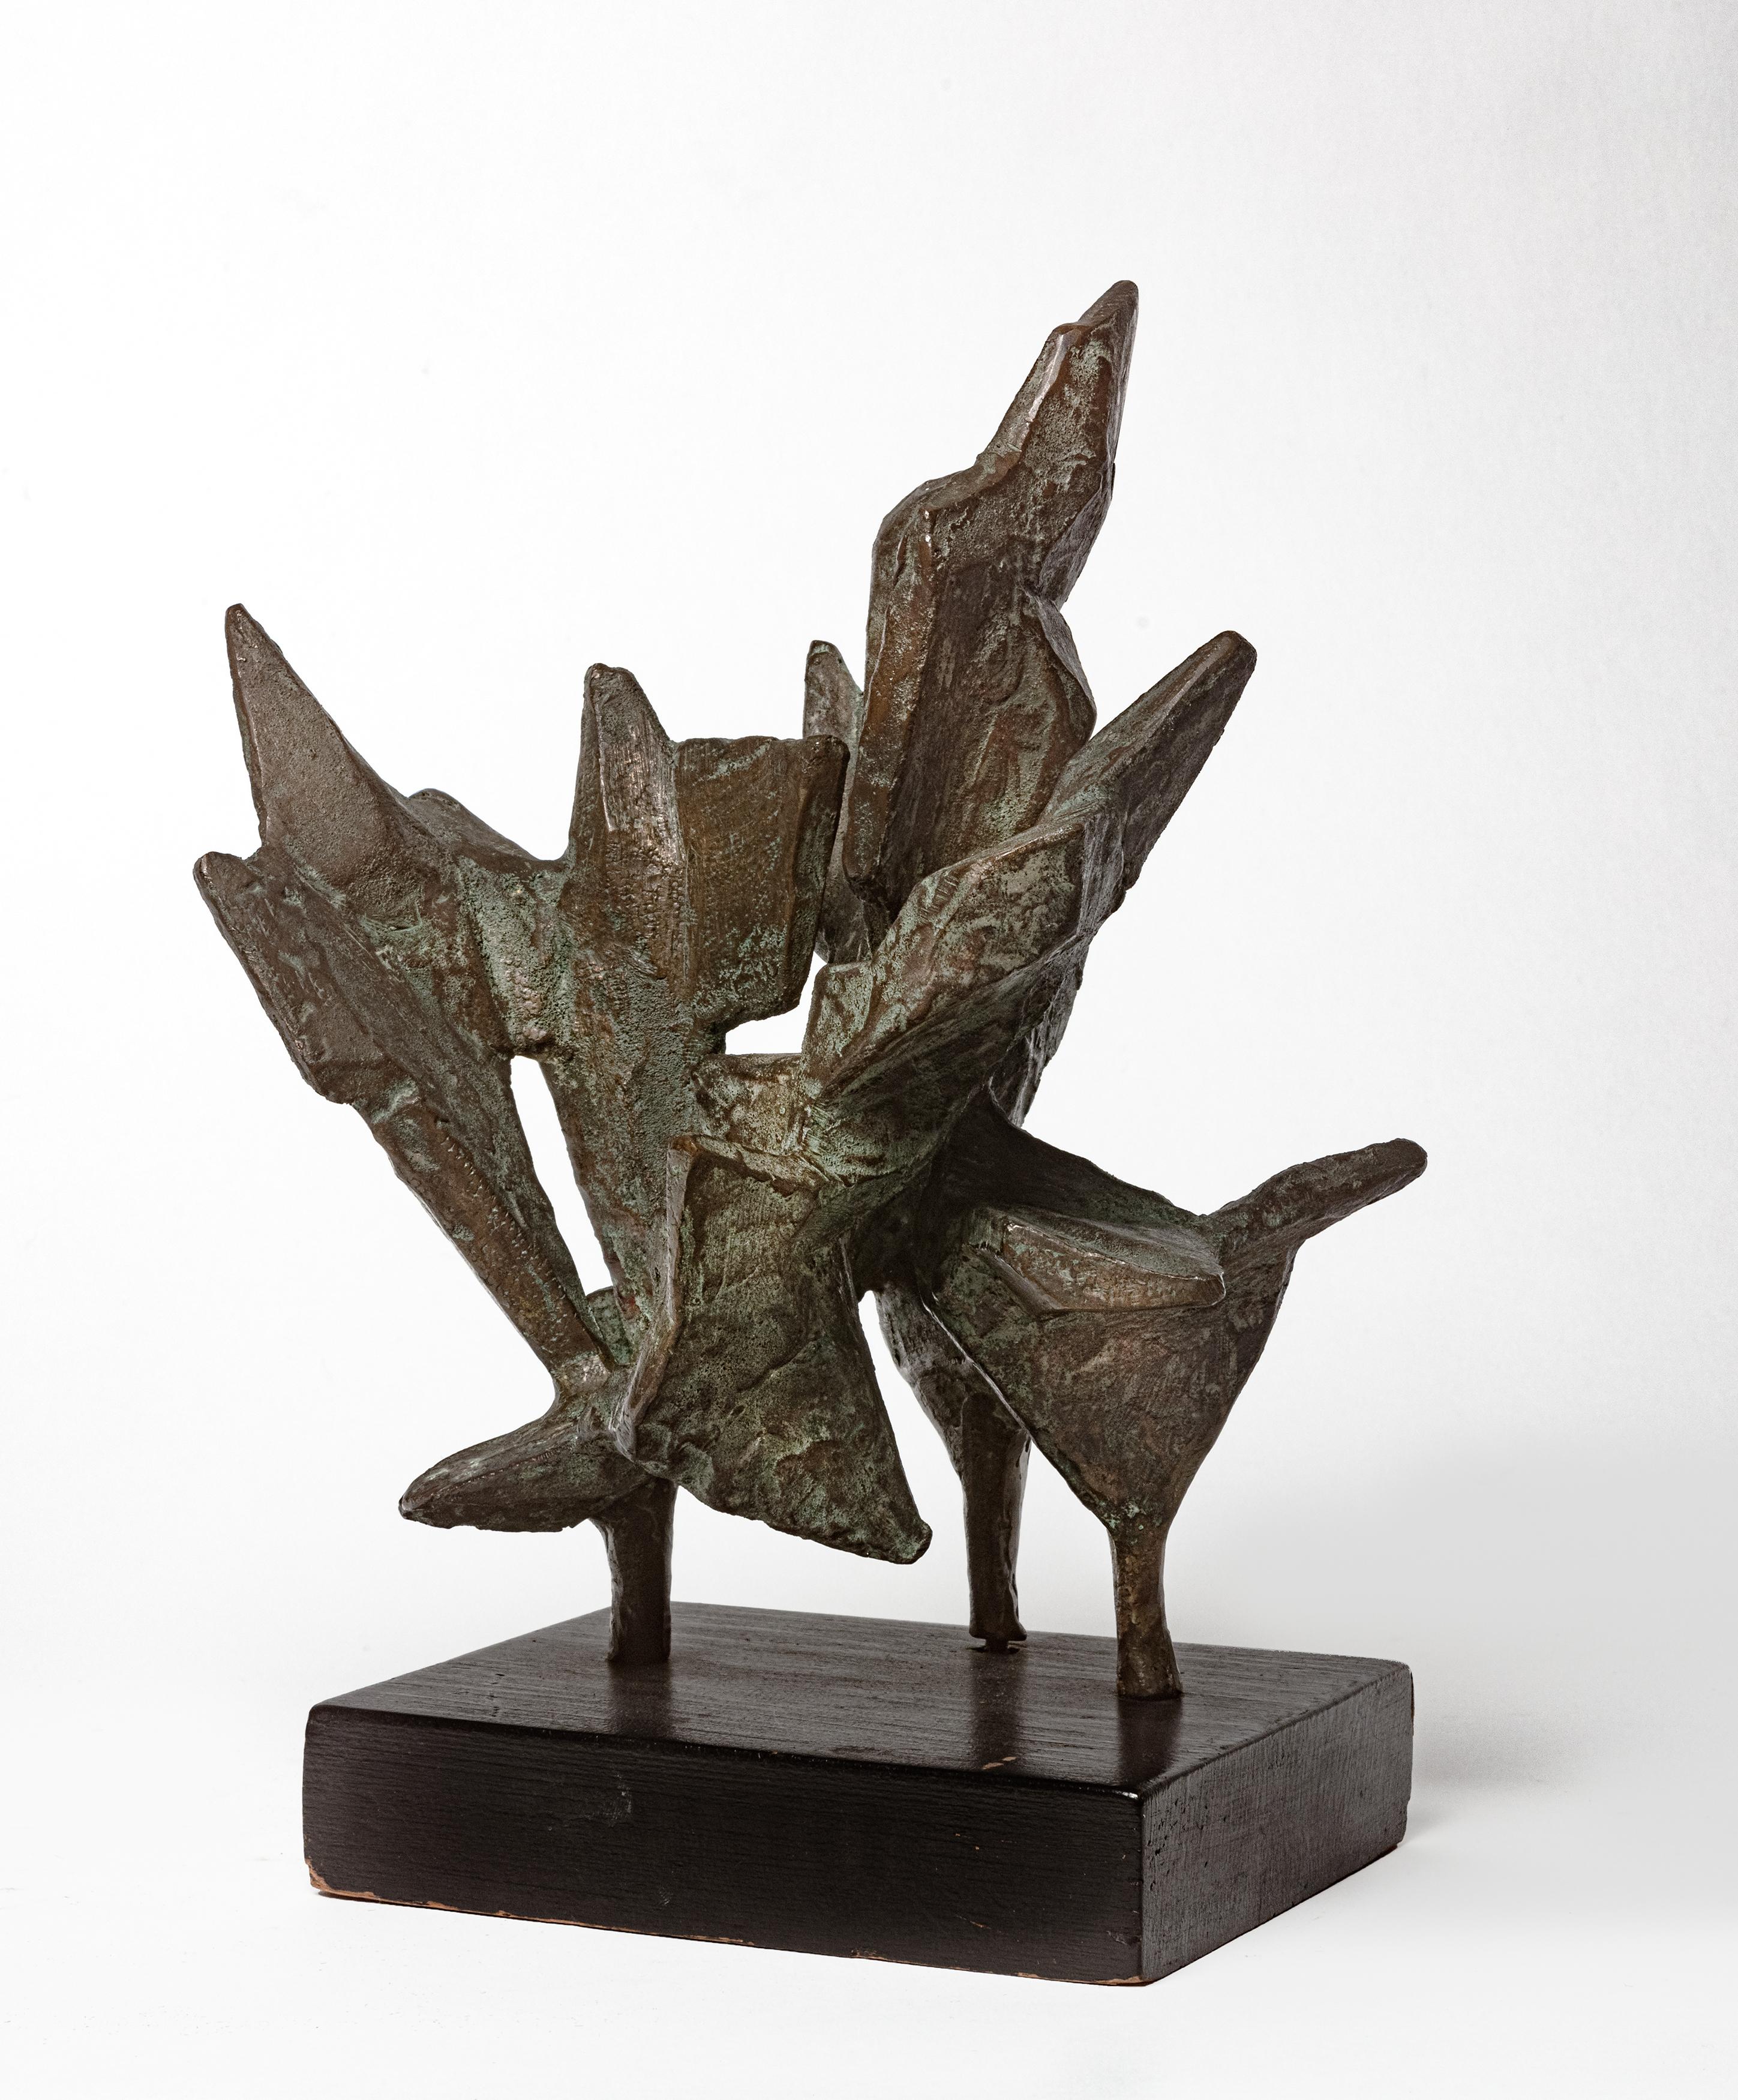 Untitled - Abstract Sculpture by Lin Emery